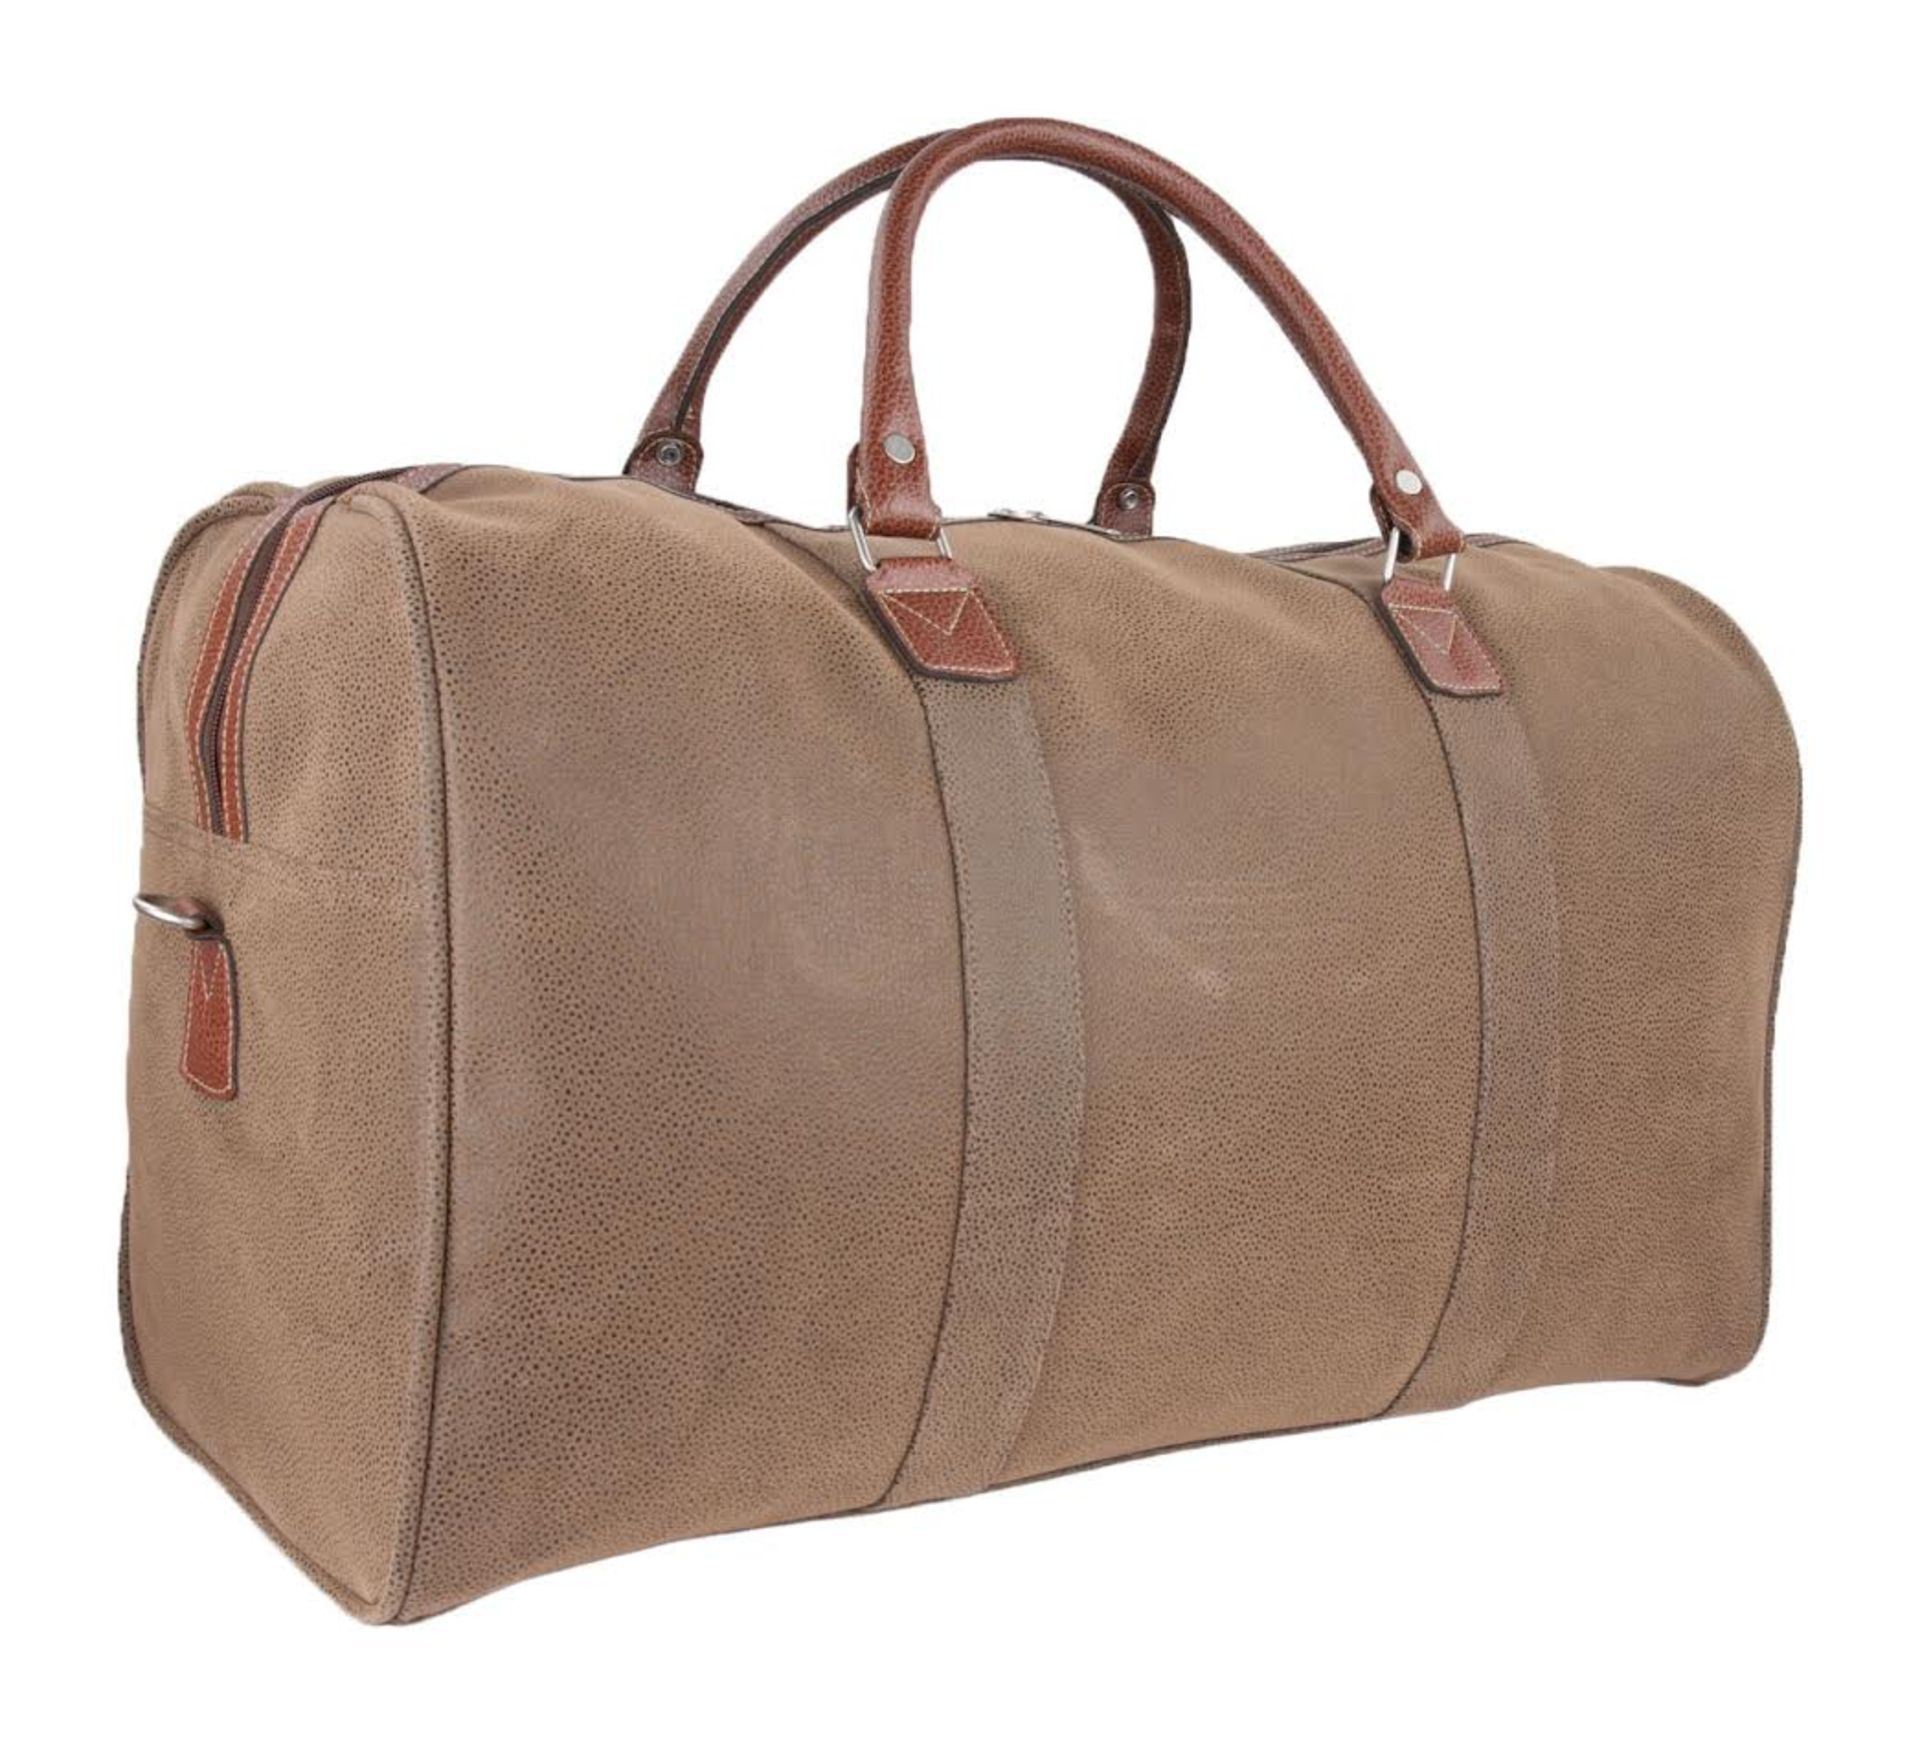 V Brand New Canvas Style Weekend Travel Bag - Brown Leather Handle - Outside Zip Pocket - Includes